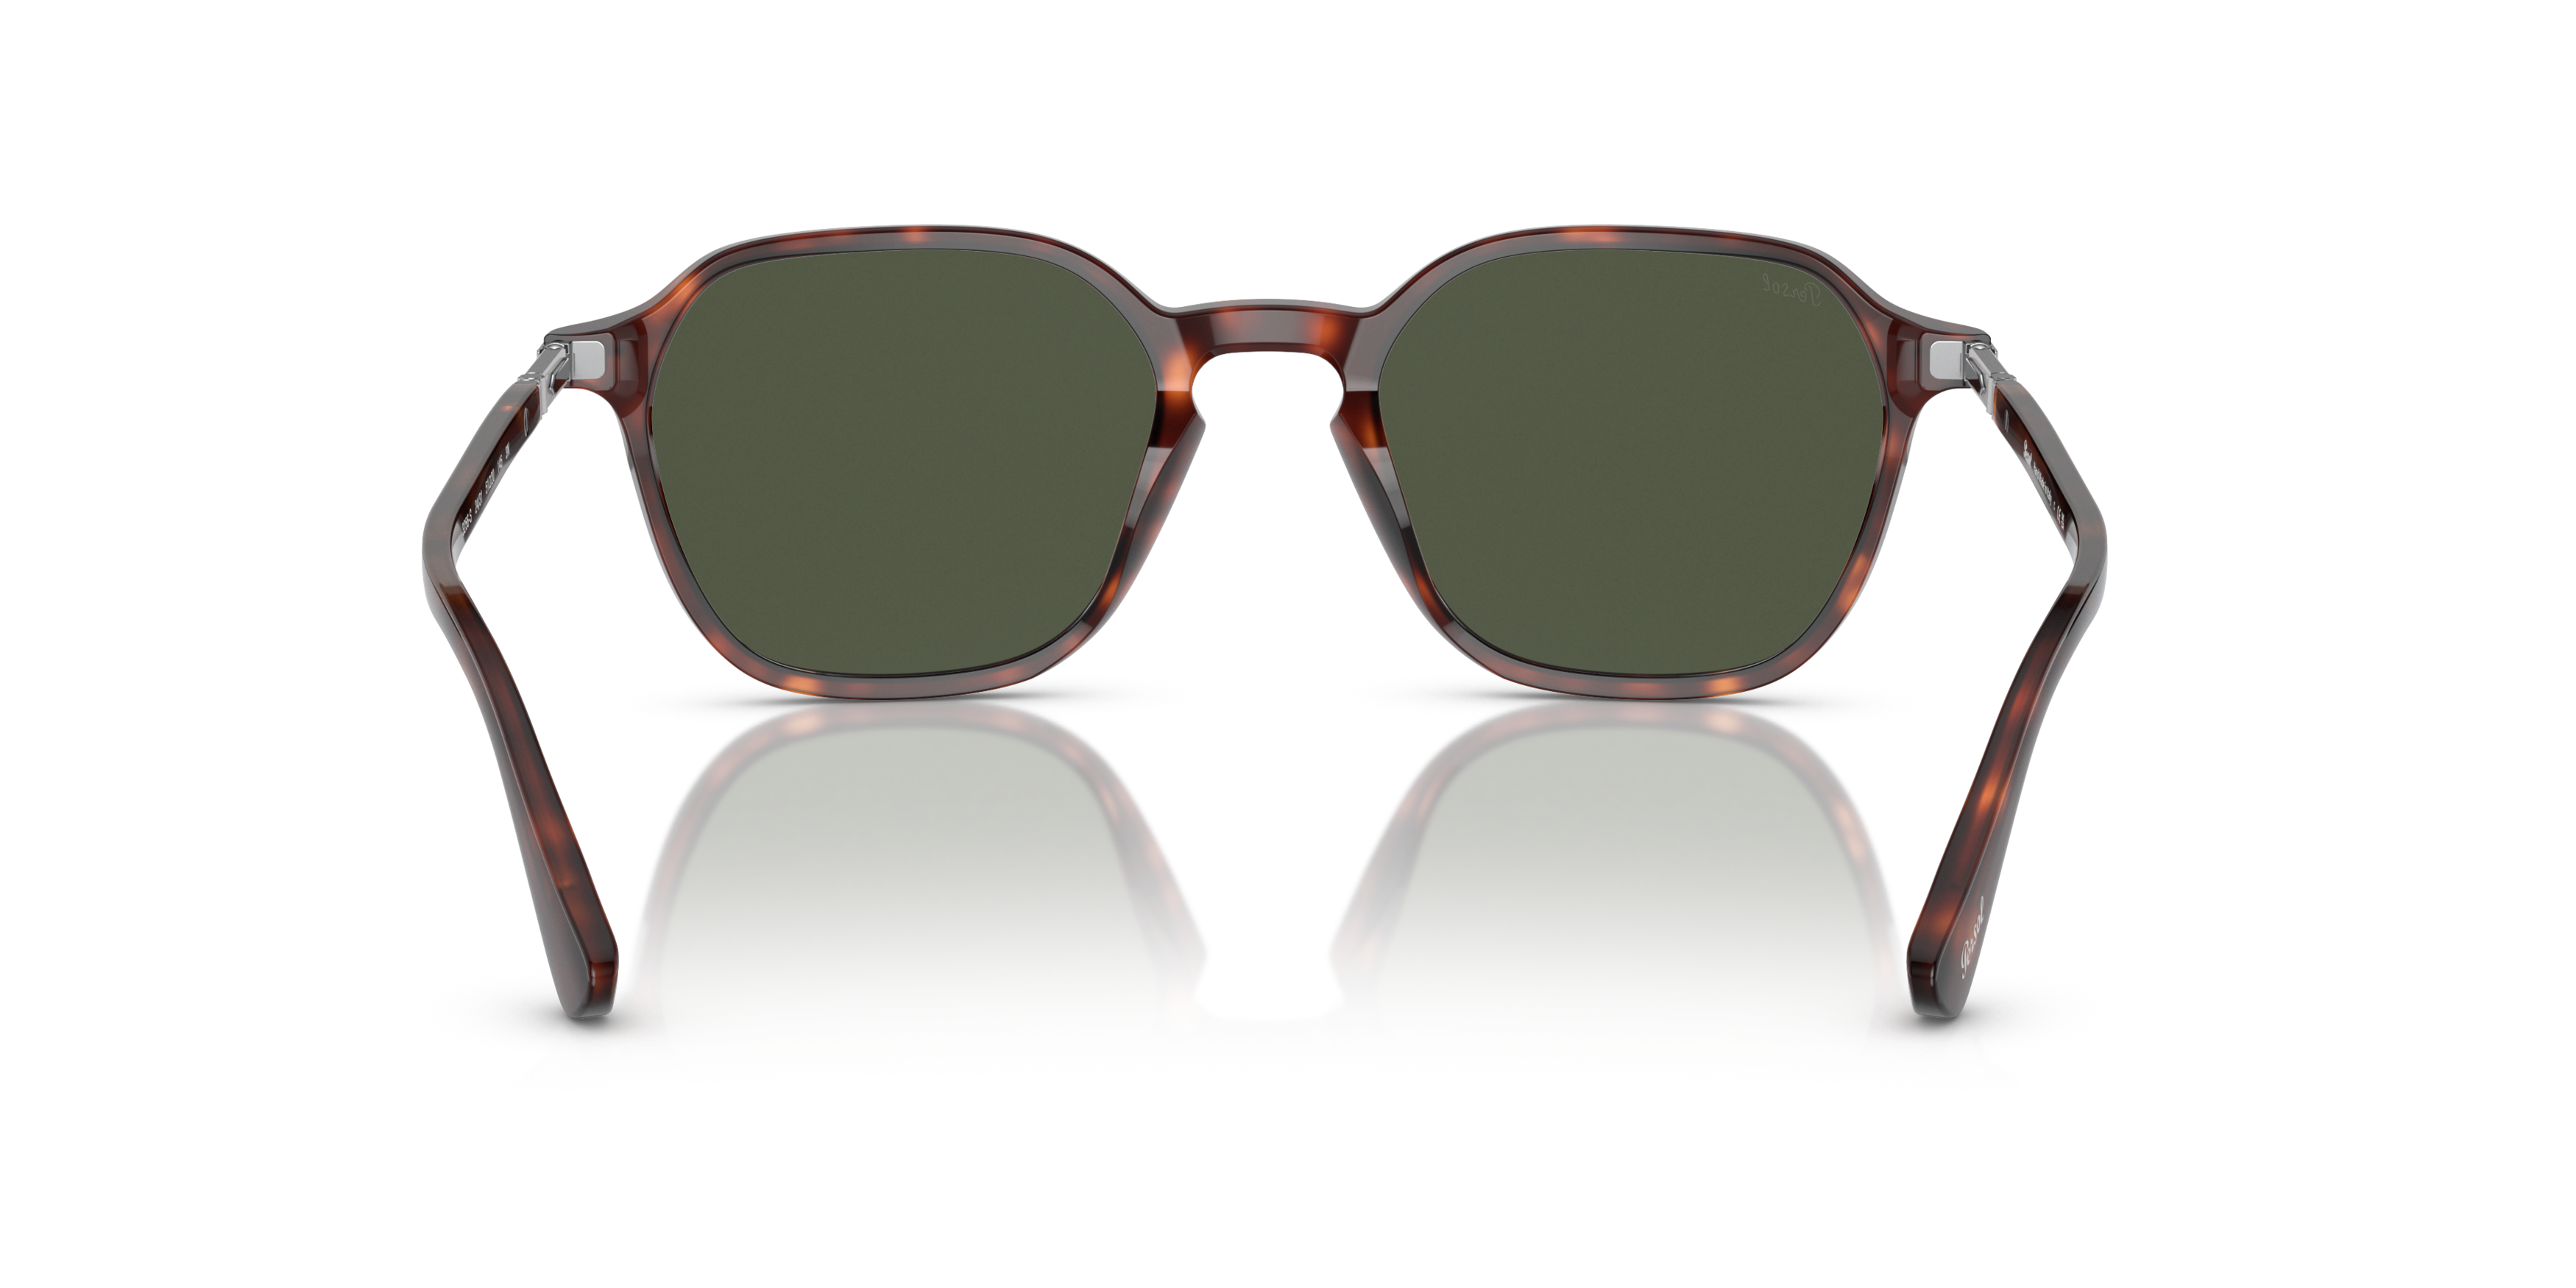 [products.image.detail02] Persol 0PO3256S 24/31